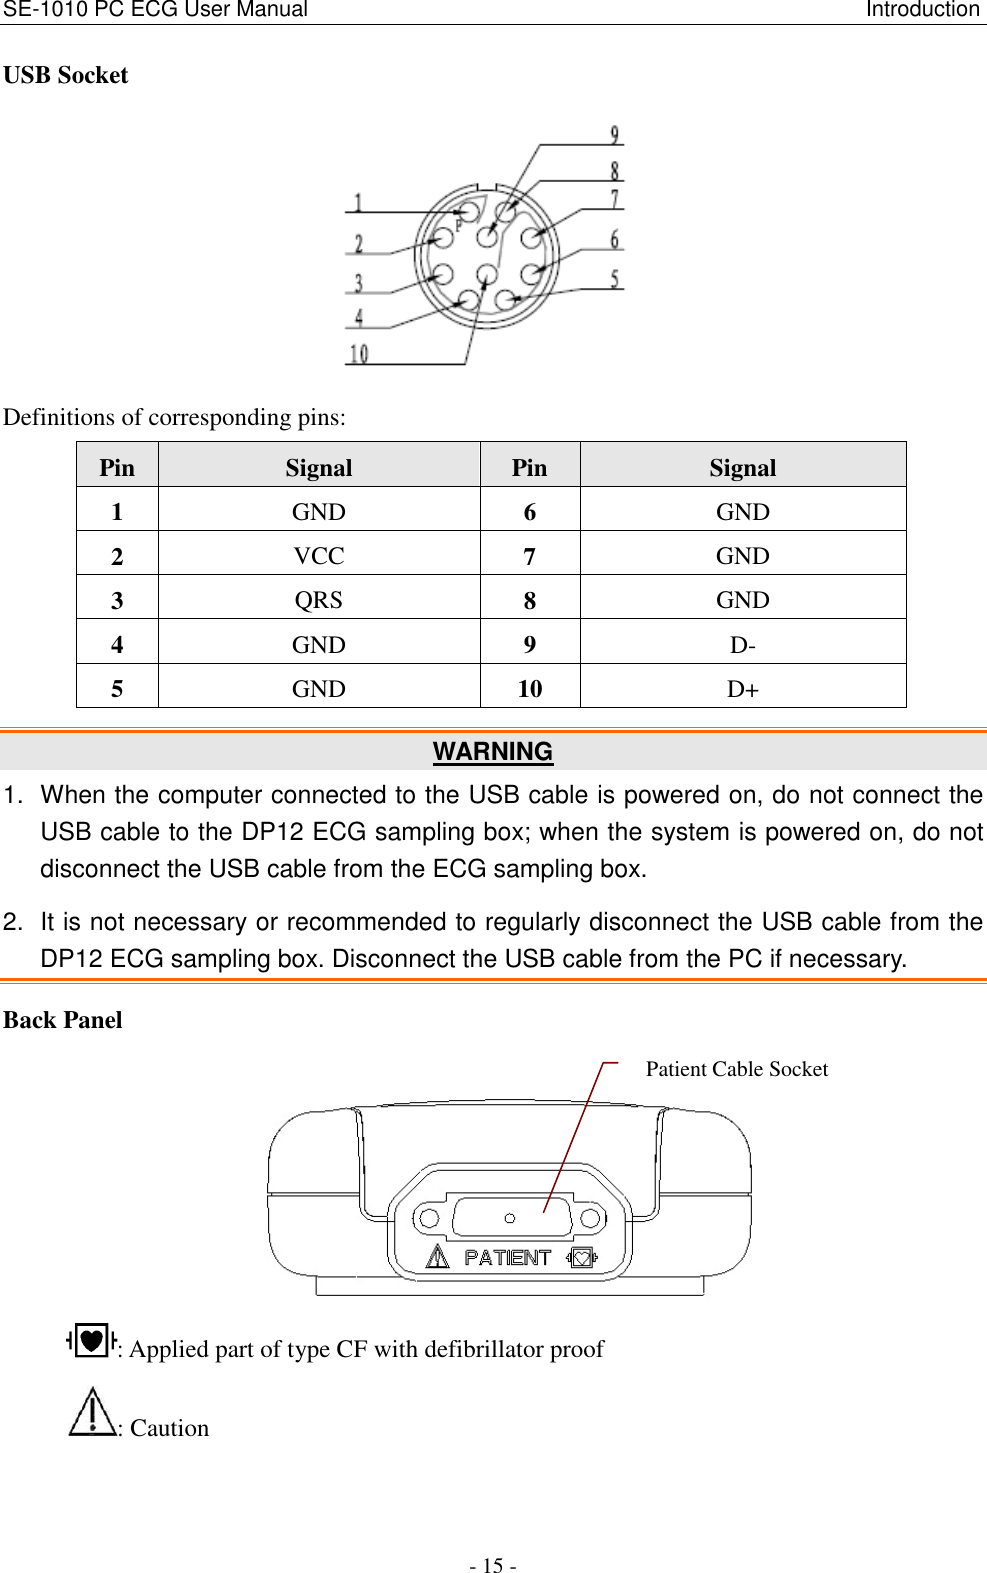 SE-1010 PC ECG User Manual                                                                                                      Introduction - 15 - USB Socket  Definitions of corresponding pins: Pin  Signal  Pin  Signal 1  GND  6  GND 2  VCC  7  GND 3  QRS  8  GND 4  GND  9  D- 5  GND  10  D+  WARNING 1.  When the computer connected to the USB cable is powered on, do not connect the USB cable to the DP12 ECG sampling box; when the system is powered on, do not disconnect the USB cable from the ECG sampling box. 2.  It is not necessary or recommended to regularly disconnect the USB cable from the DP12 ECG sampling box. Disconnect the USB cable from the PC if necessary. Back Panel  : Applied part of type CF with defibrillator proof : Caution     Patient Cable Socket 